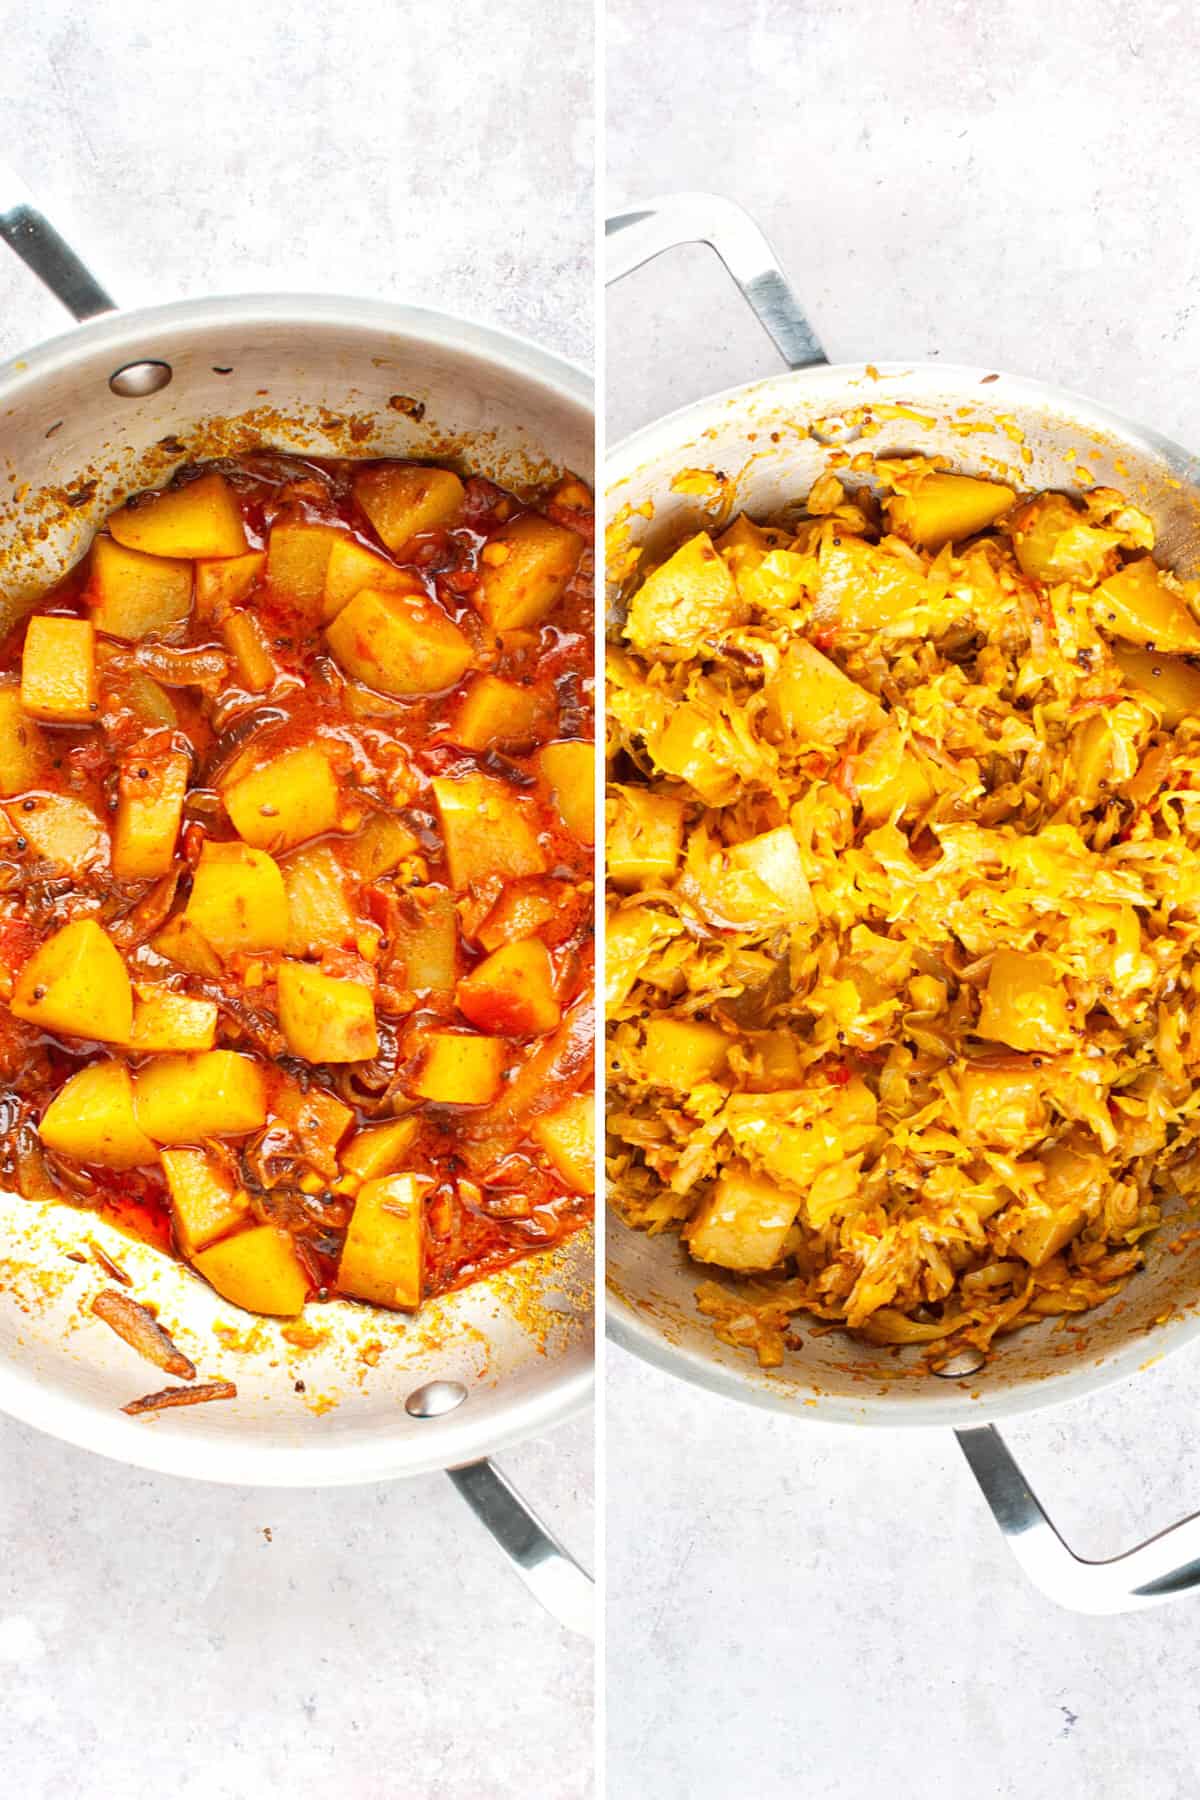 Collage. 1st pic: potatoes cooking in curry masala in wok; 2nd pic: cooked cabbage and potato curry.